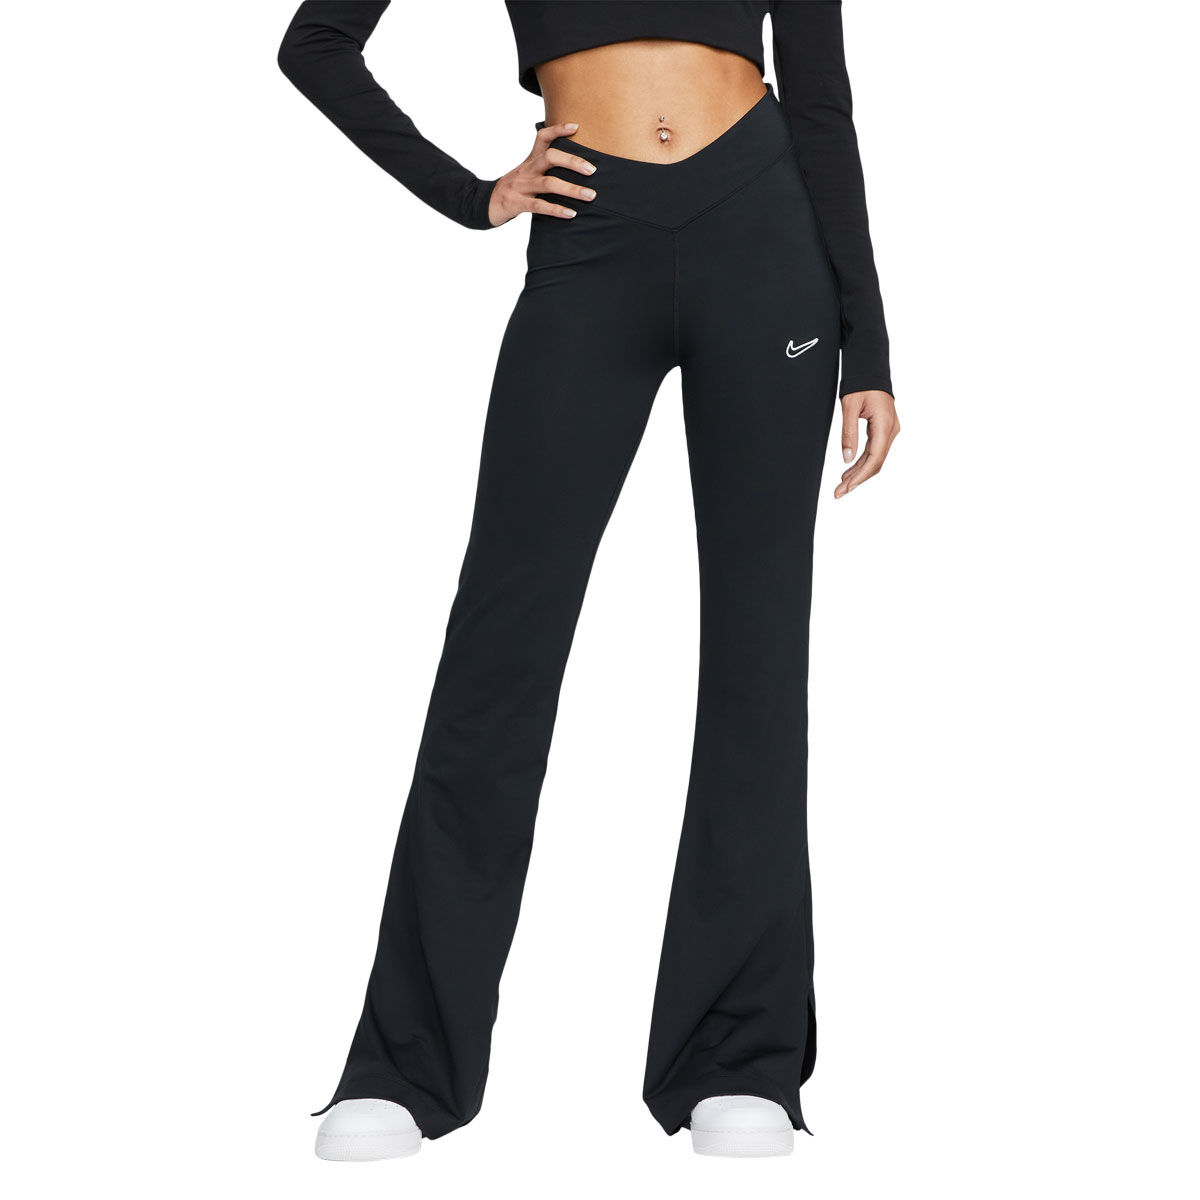 On the Move V Front Flare Leggings - Tennessee Jane